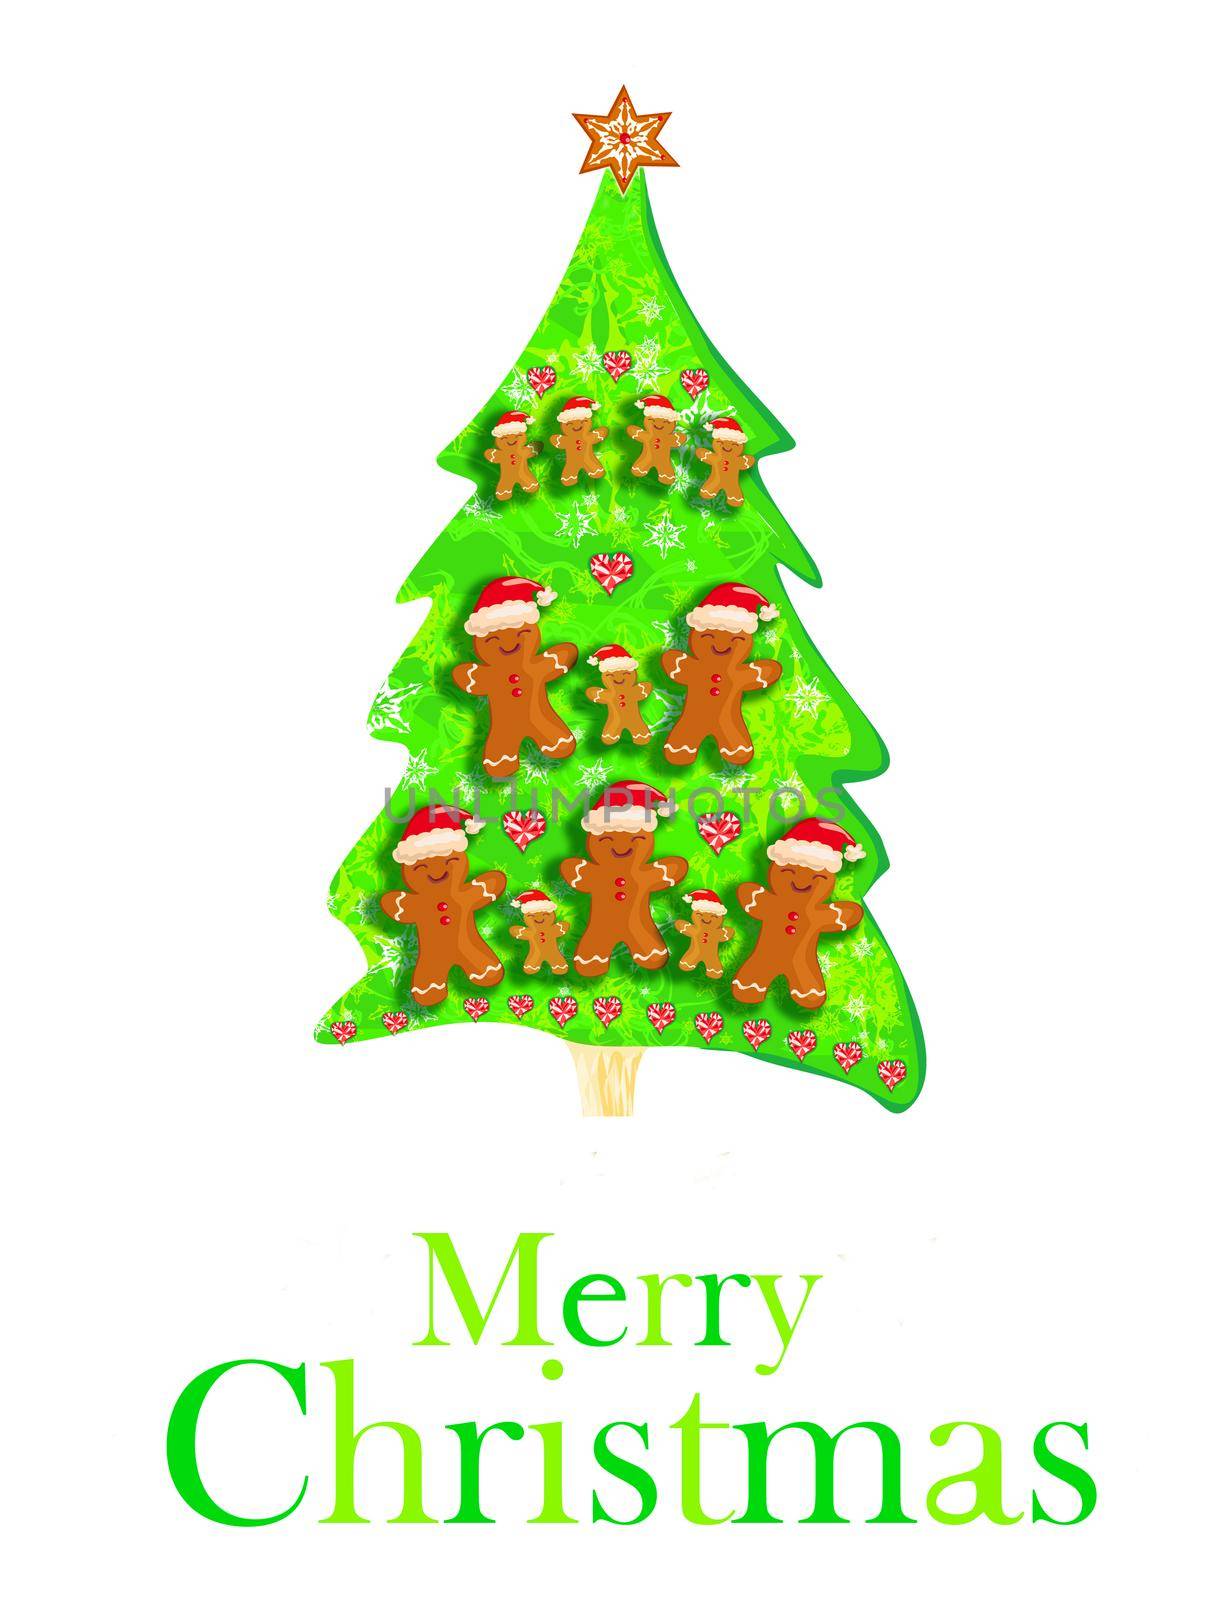 card with a Gingerbread funny Christmas tree decorations by JackyBrown